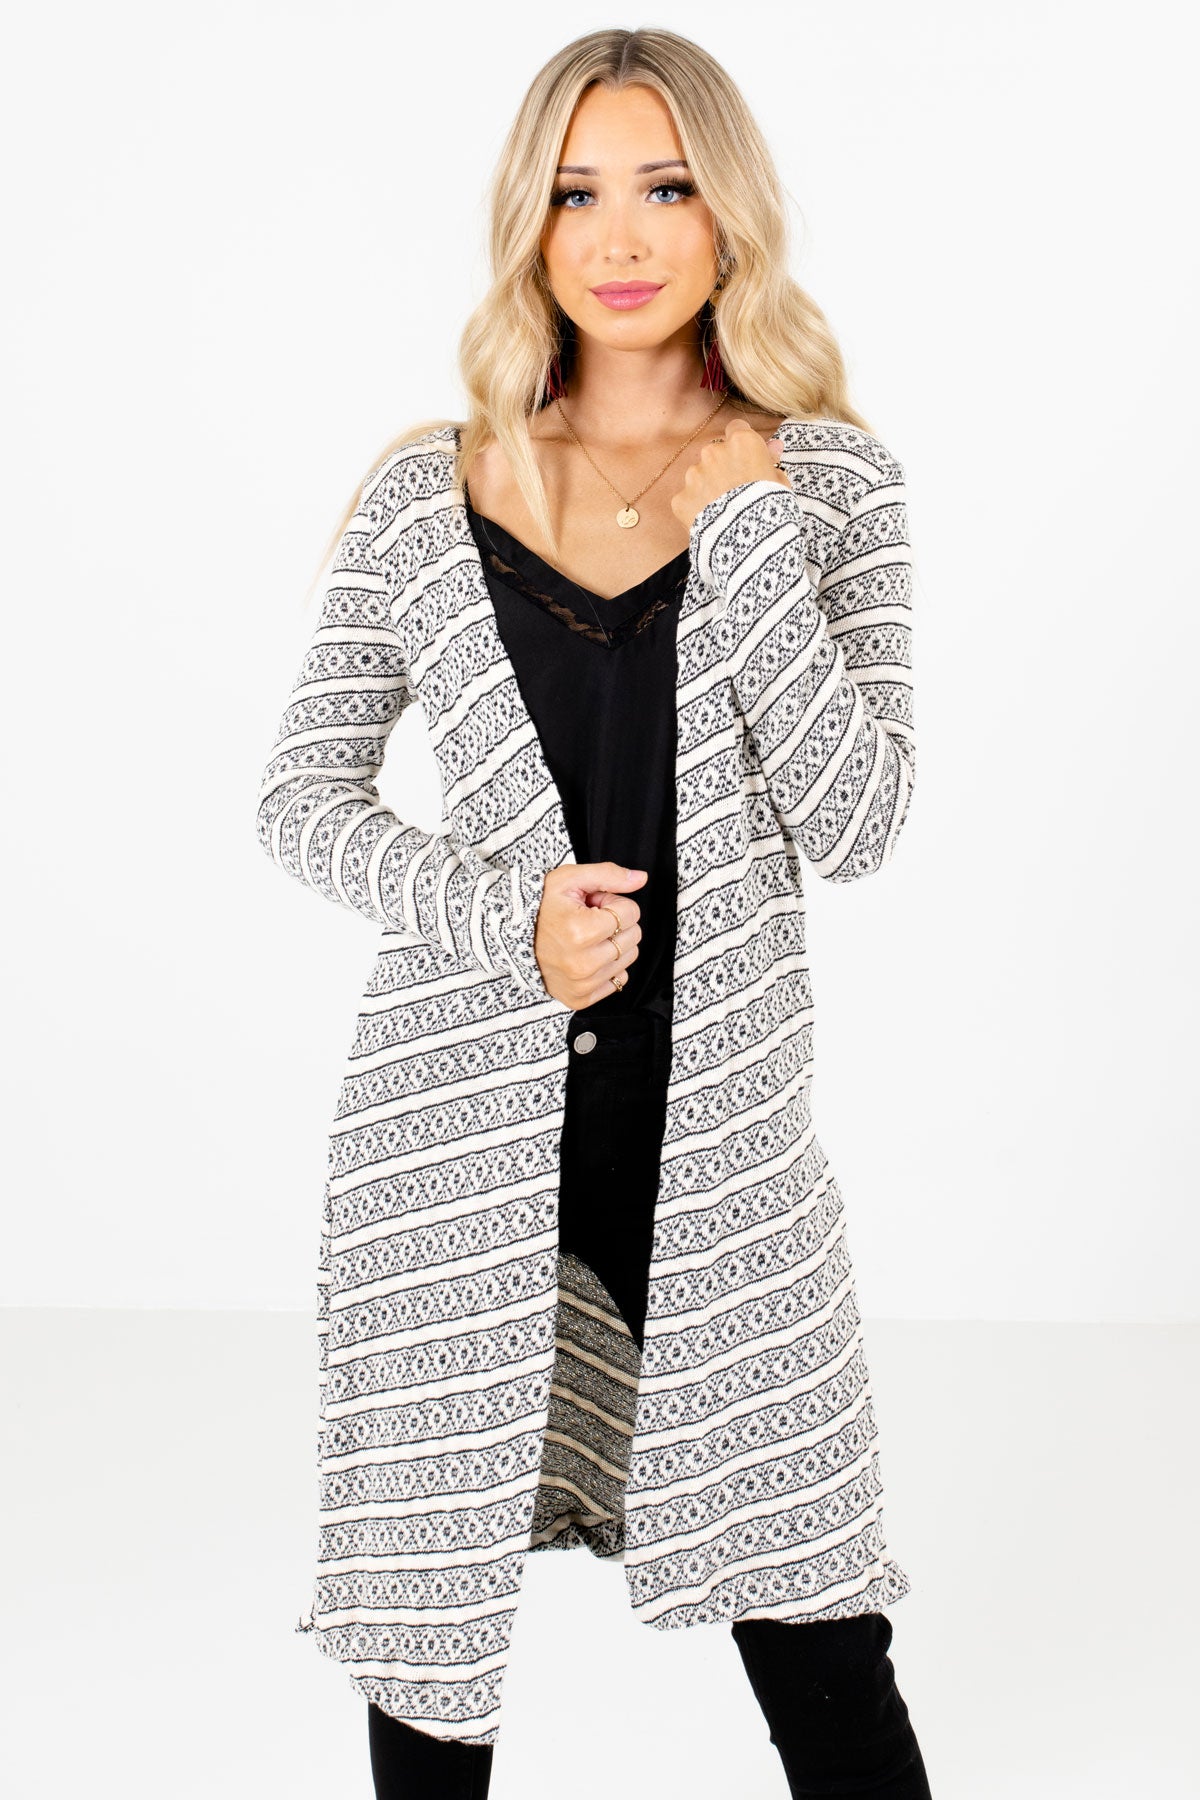 White and Black Stripe Geometric Patterned Boutique Cardigans for Women